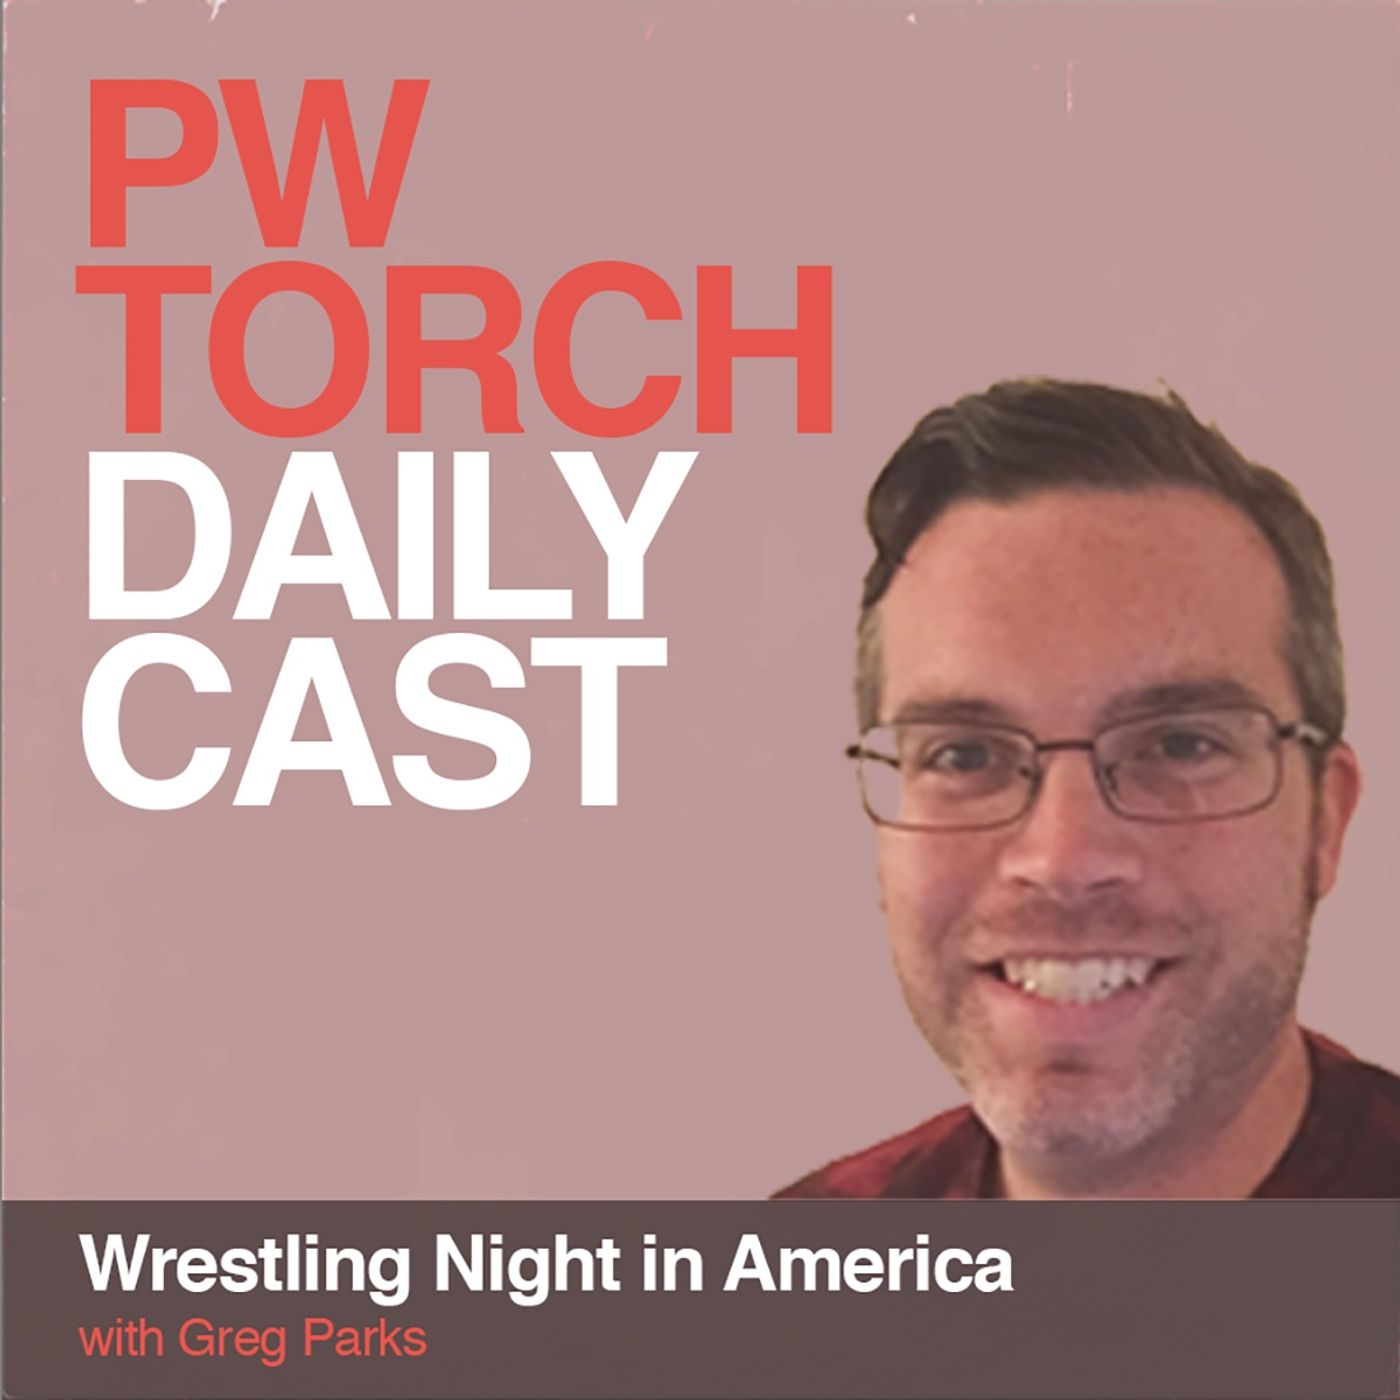 PWTorch Dailycast - Wrestling Night in America - Heydorn & LeClair discuss upcoming AEW Collision premiere, Money in the Bank, more